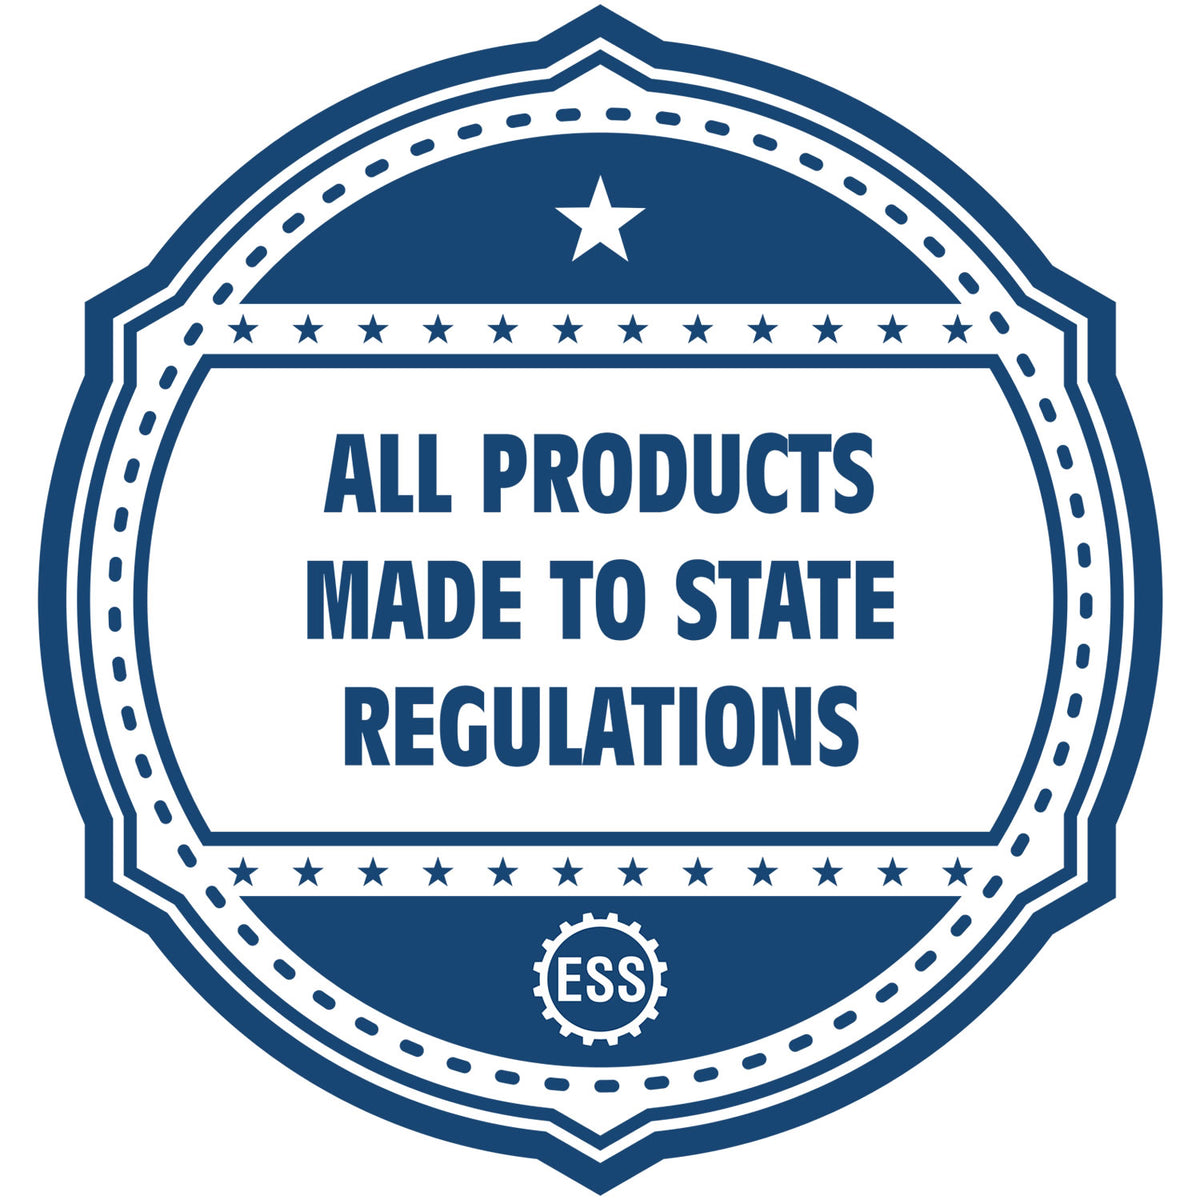 An icon or badge element for the Digital California PE Stamp and Electronic Seal for California Engineer showing that this product is made in compliance with state regulations.